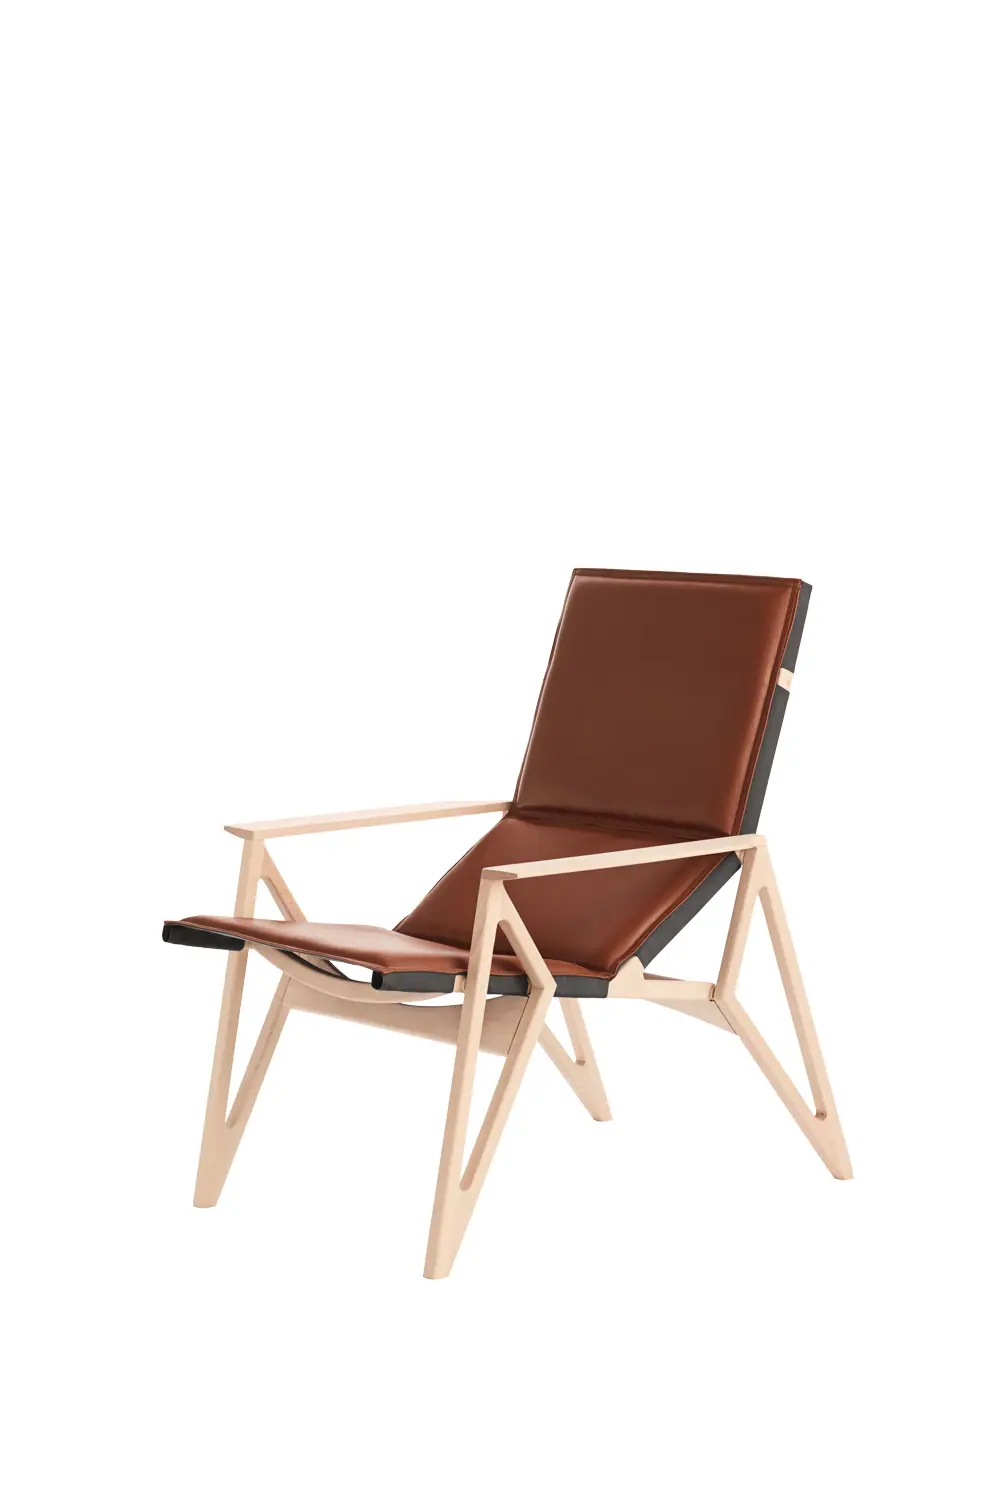 42096-42091-iconica-chair